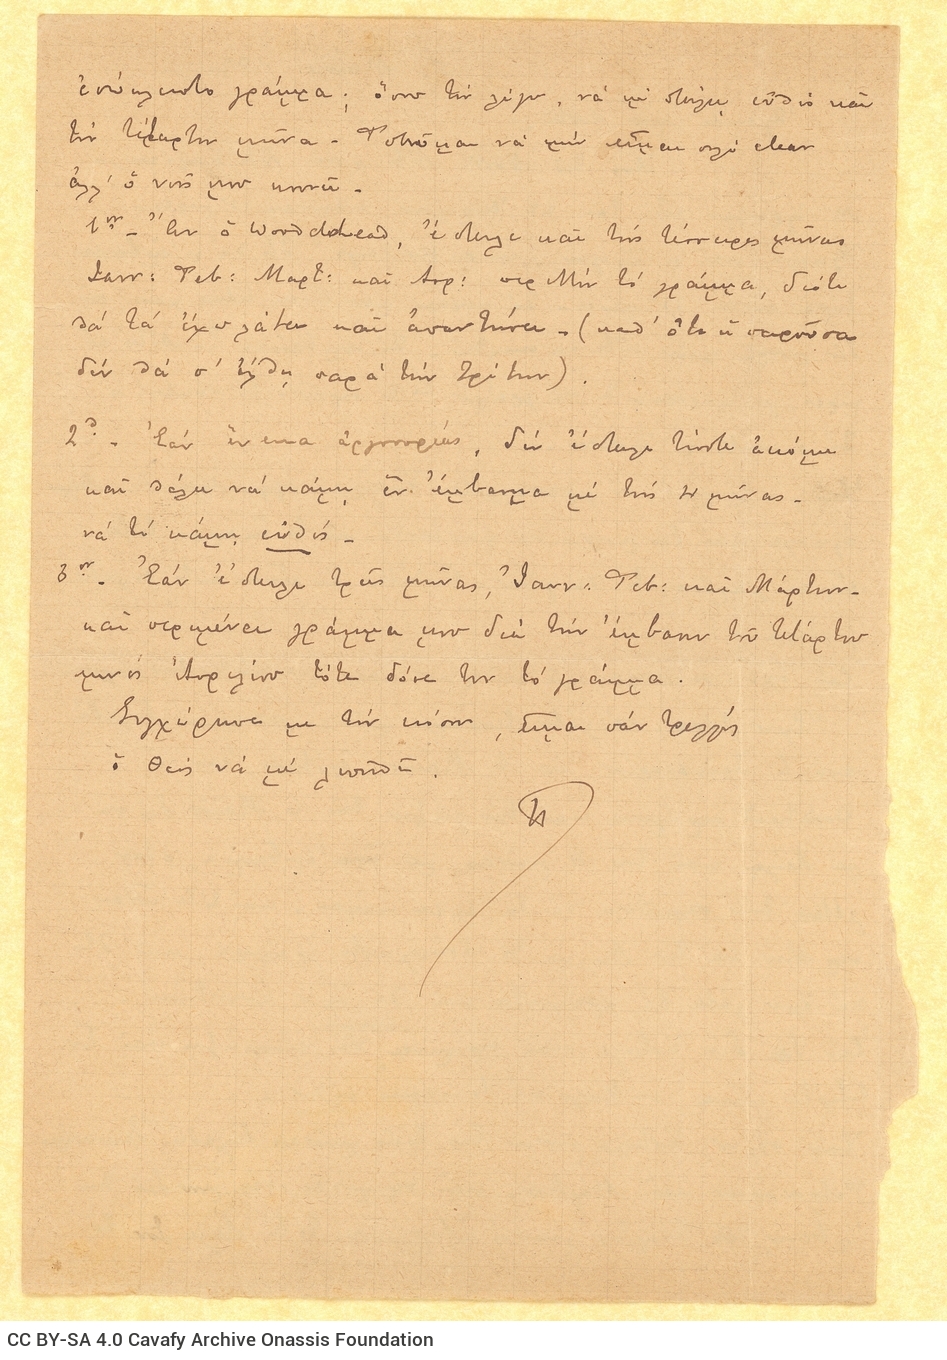 Handwritten letter by Paul Cavafy to C. P. Cavafy on both sides of a sheet. Paul expresses his concern for the fact that he i